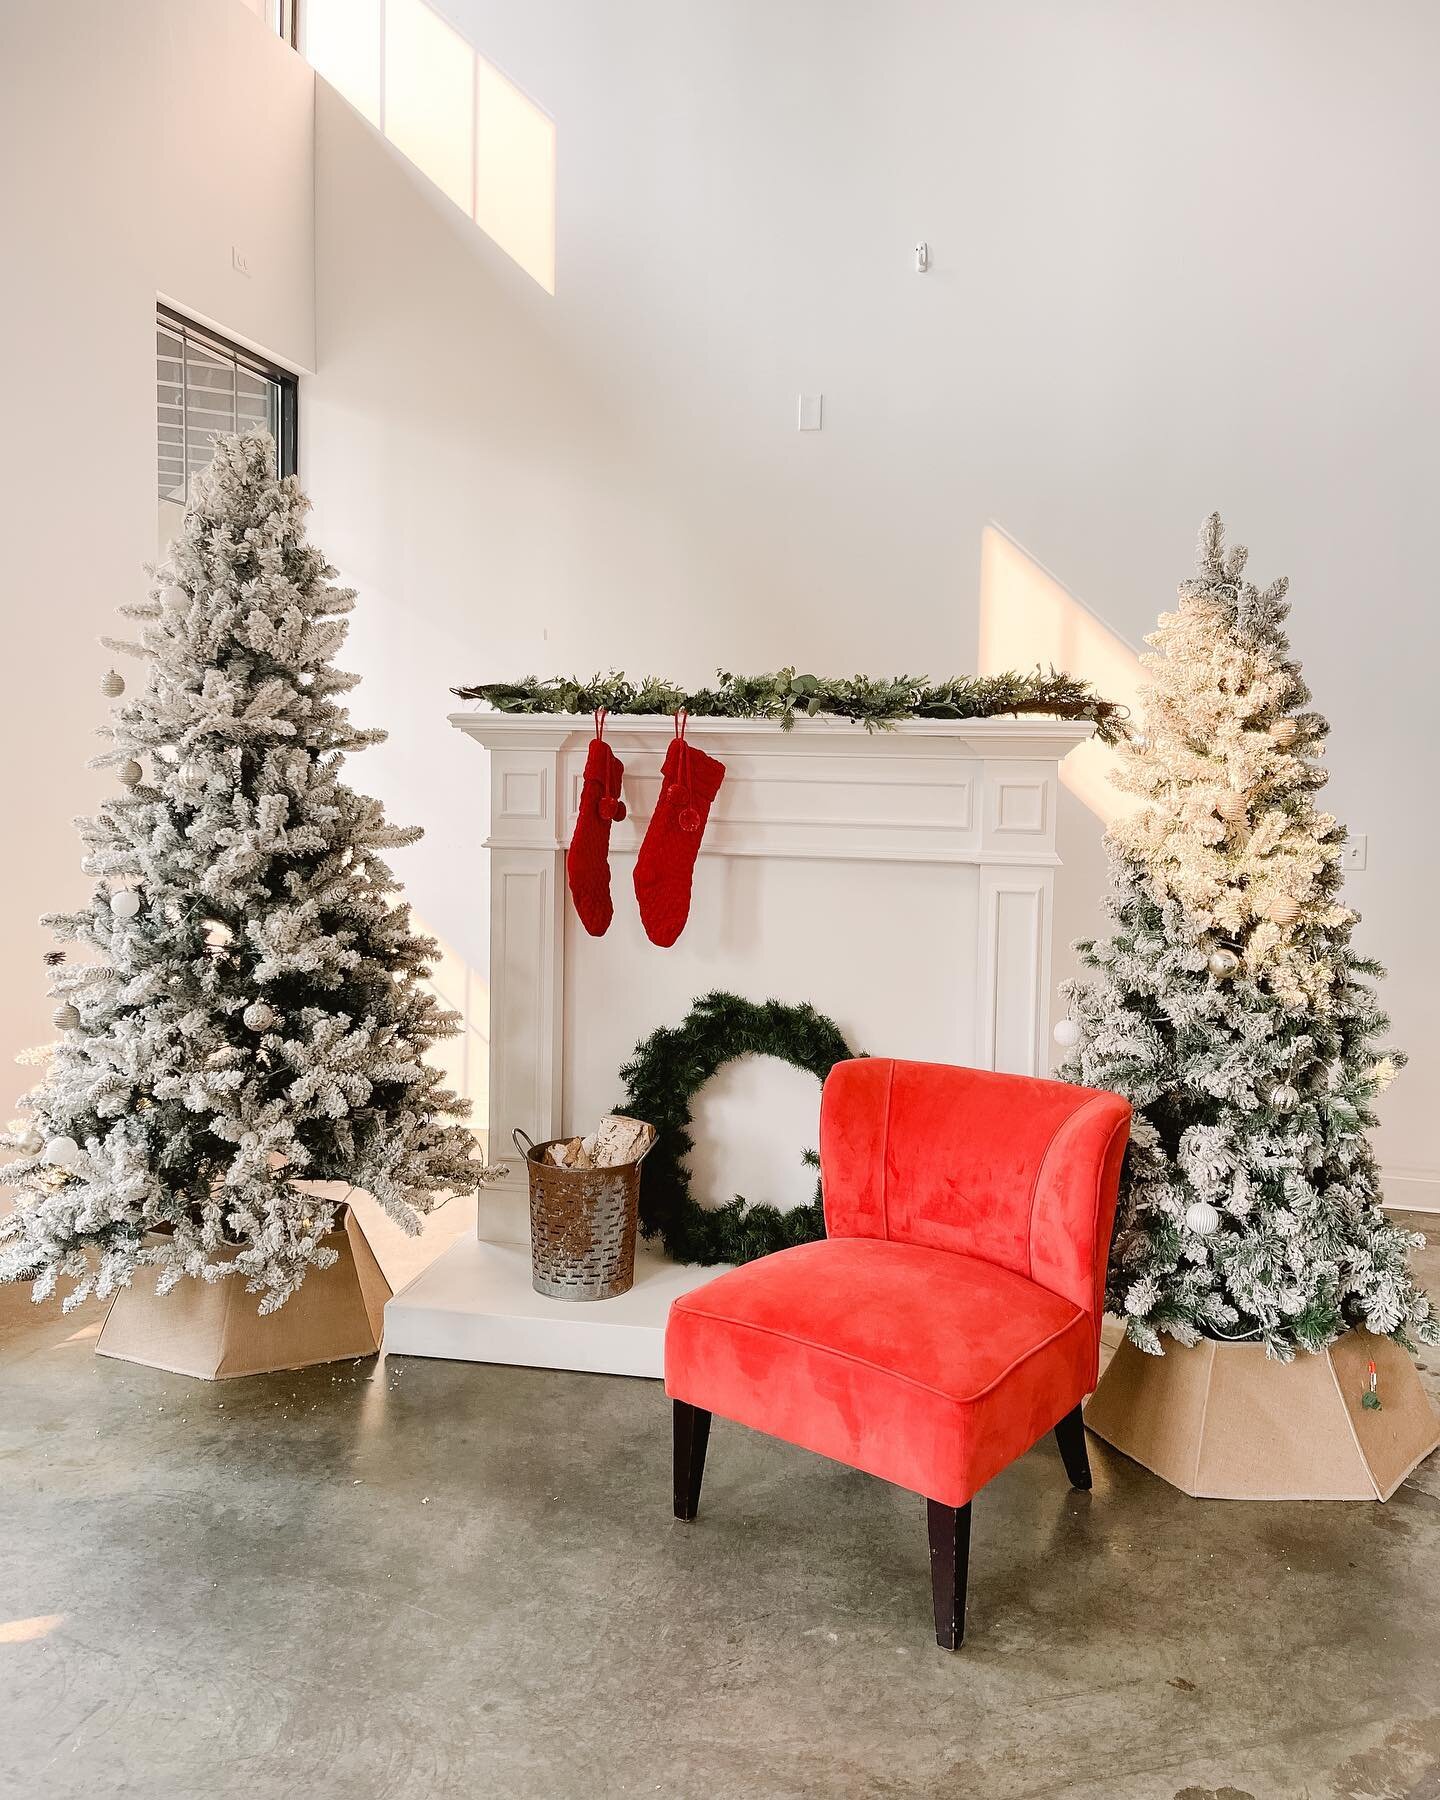 The Grand Studio is ready for Christmas!
Props include:
🌲Amazing white mantle/fireplace on wheels
🌲2 Green couches, red chair, white love seat, leather couch, white cube blocks, plus assortment of other stools and chairs for seating.
🌲Oversized wr